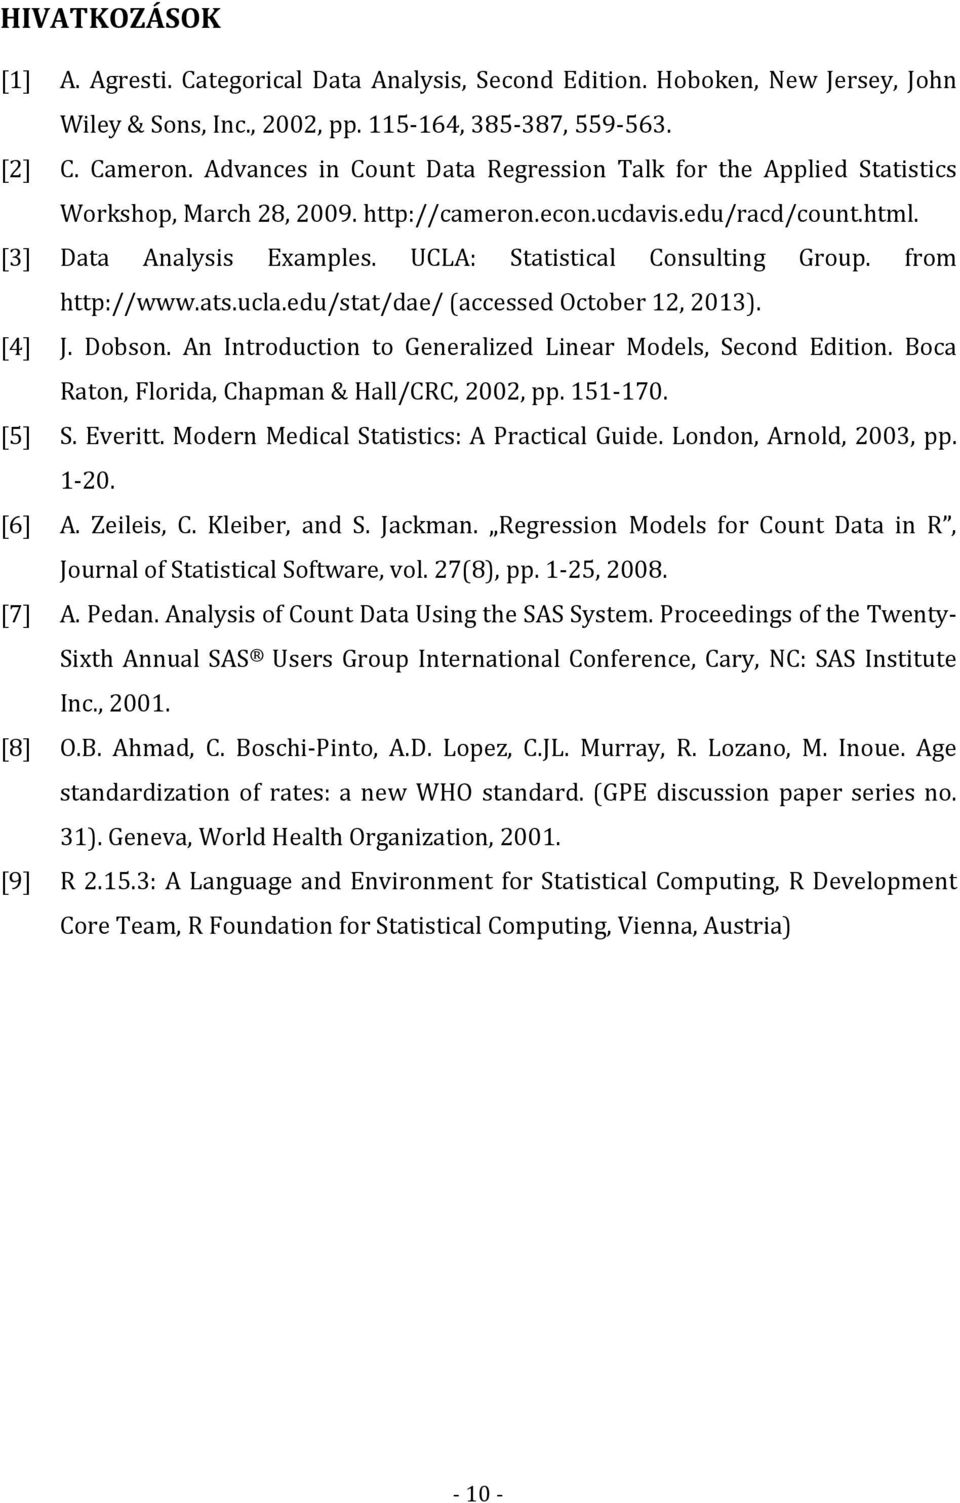 UCLA: Statistical Consulting Group. from http://www.ats.ucla.edu/stat/dae/ (accessed October 12, 2013). [4] J. Dobson. An Introduction to Generalized Linear Models, Second Edition.